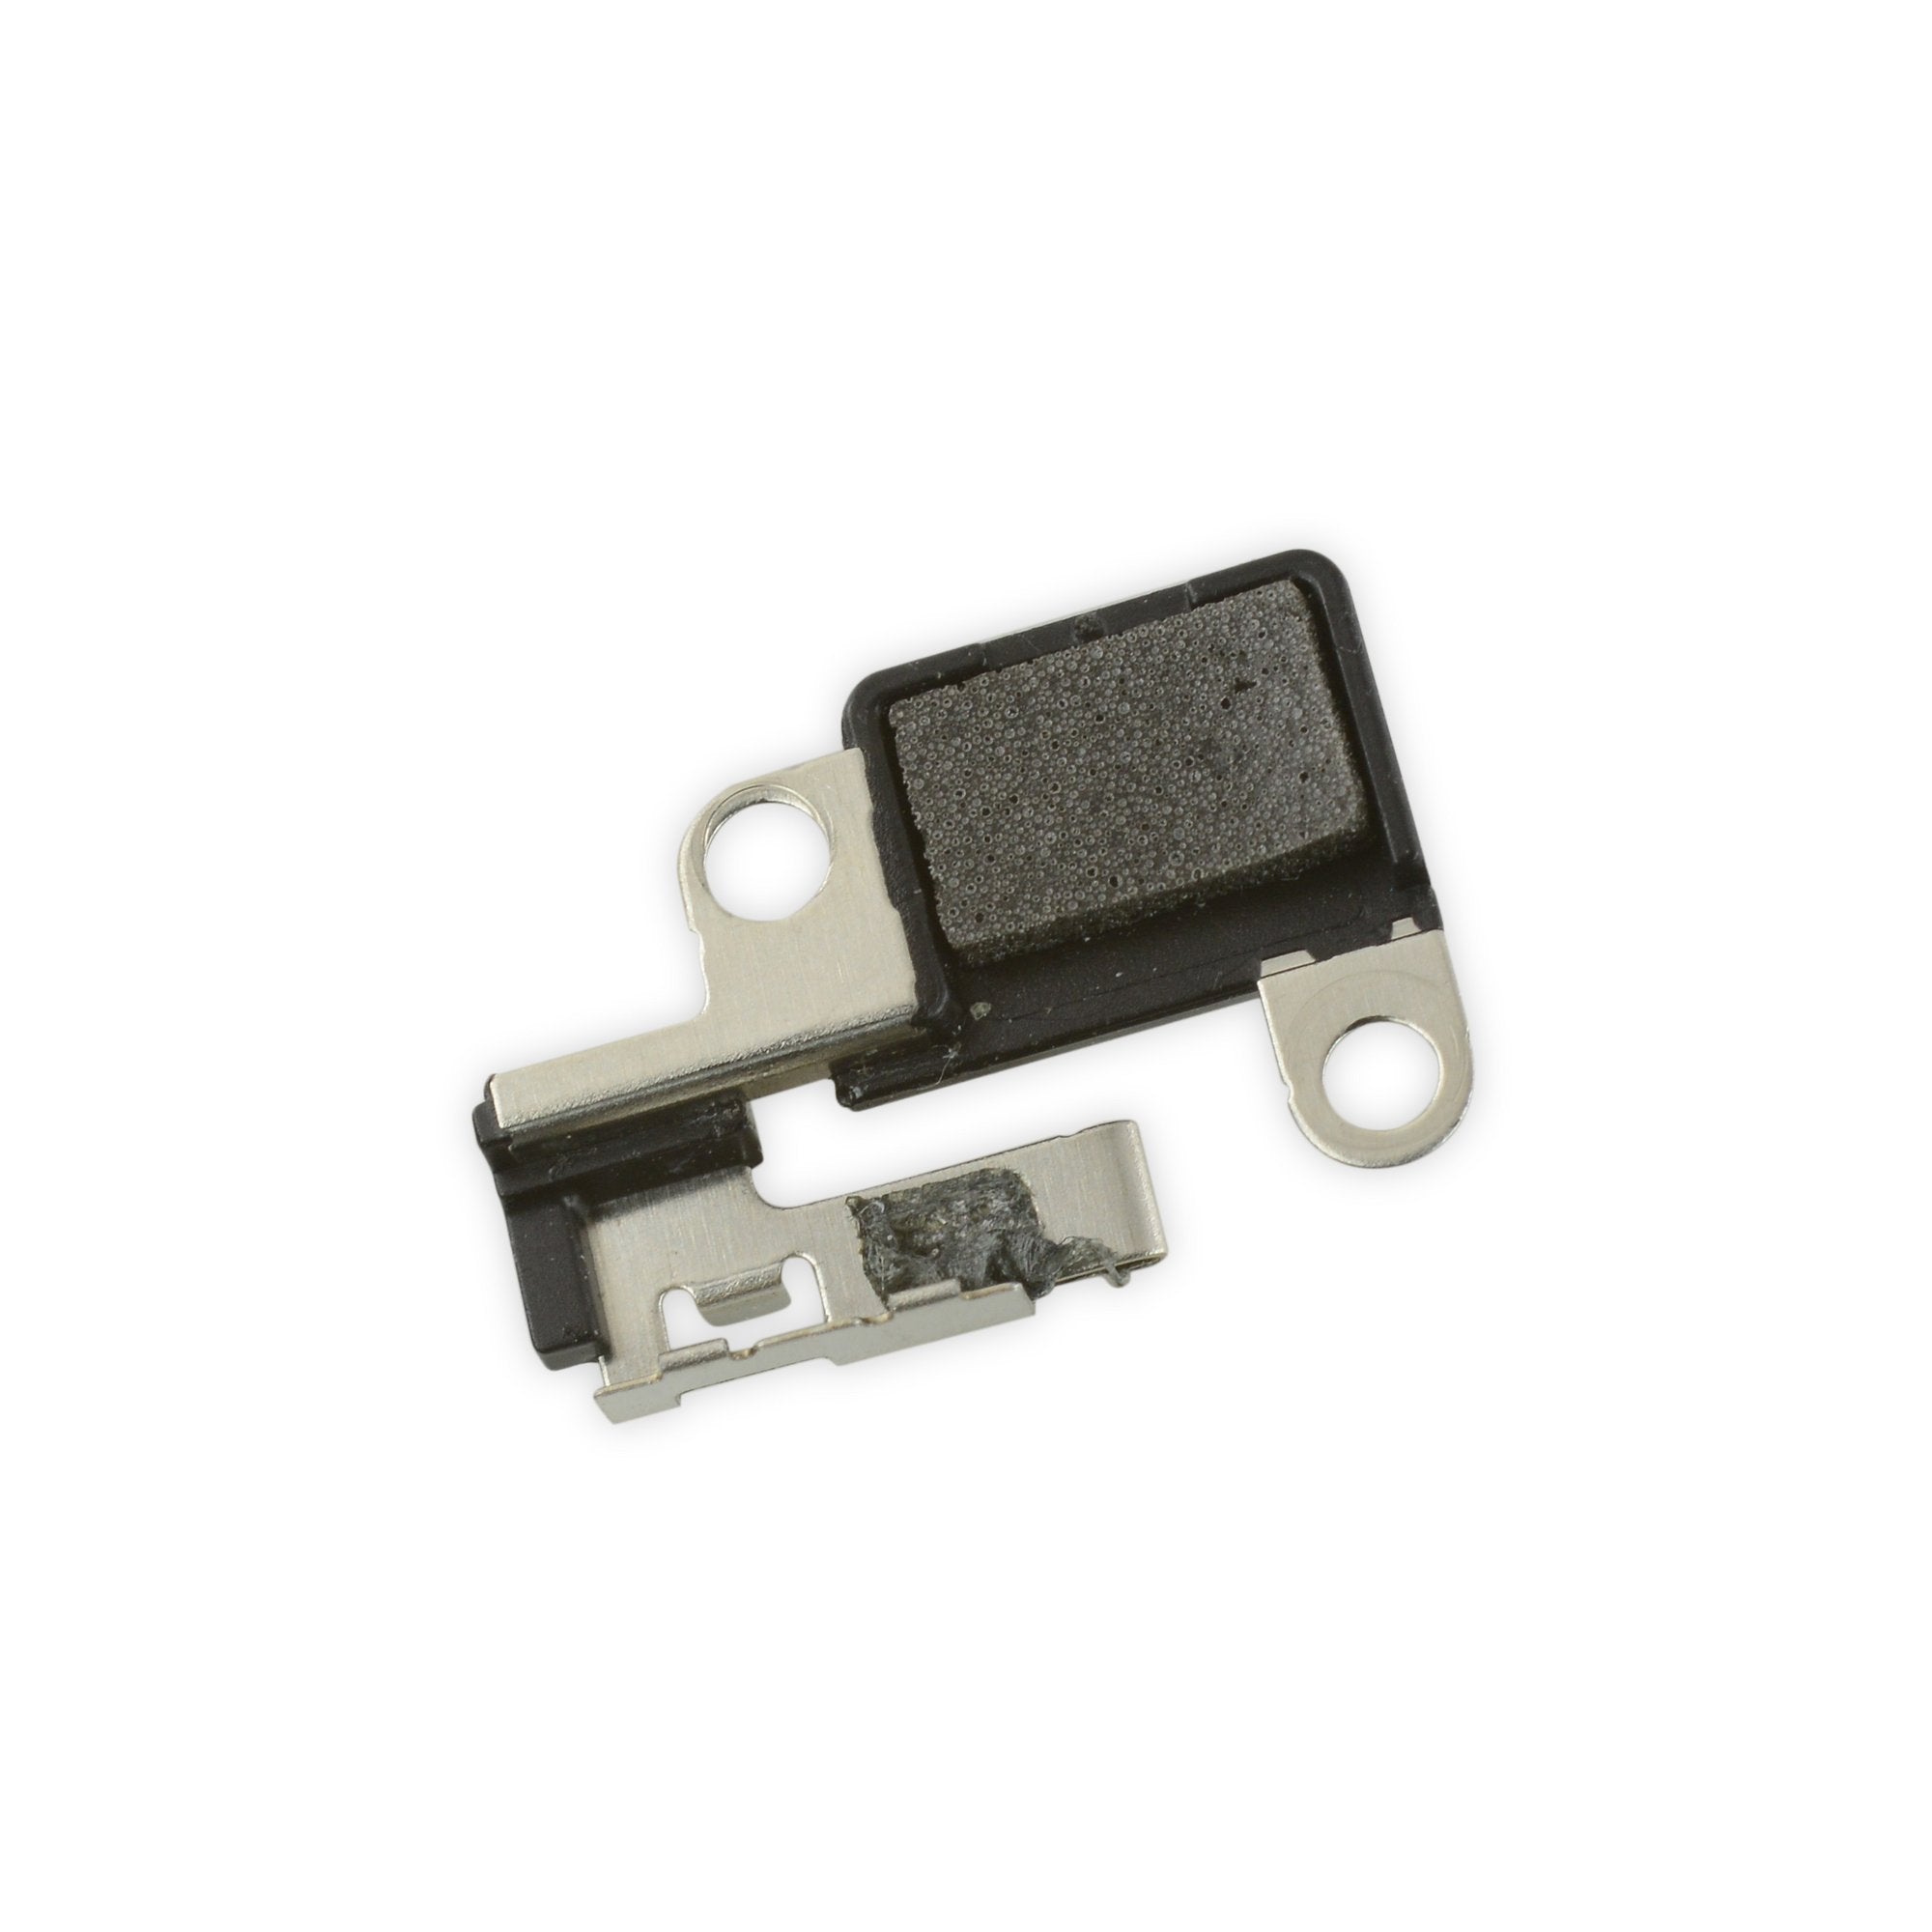 iPhone 5s Home Button Cable Support Bracket